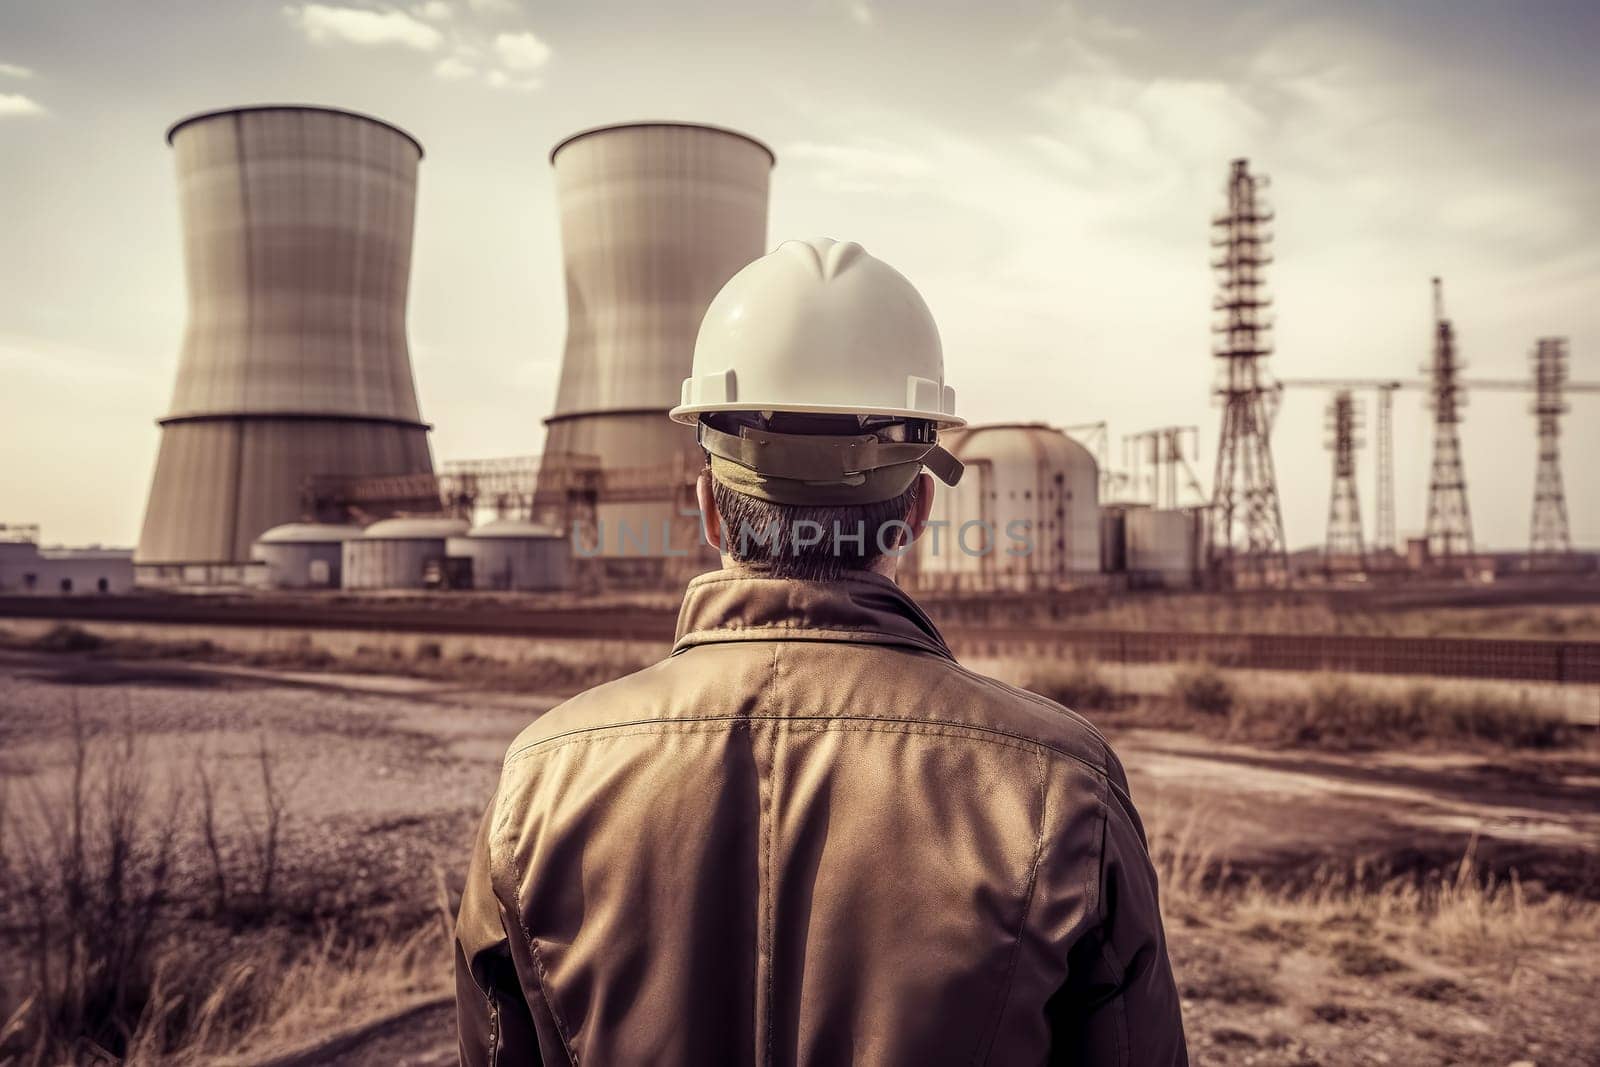 a civil engineer in a helmet looks at a nuclear power plant. energy industry. AI generated image by Edophoto